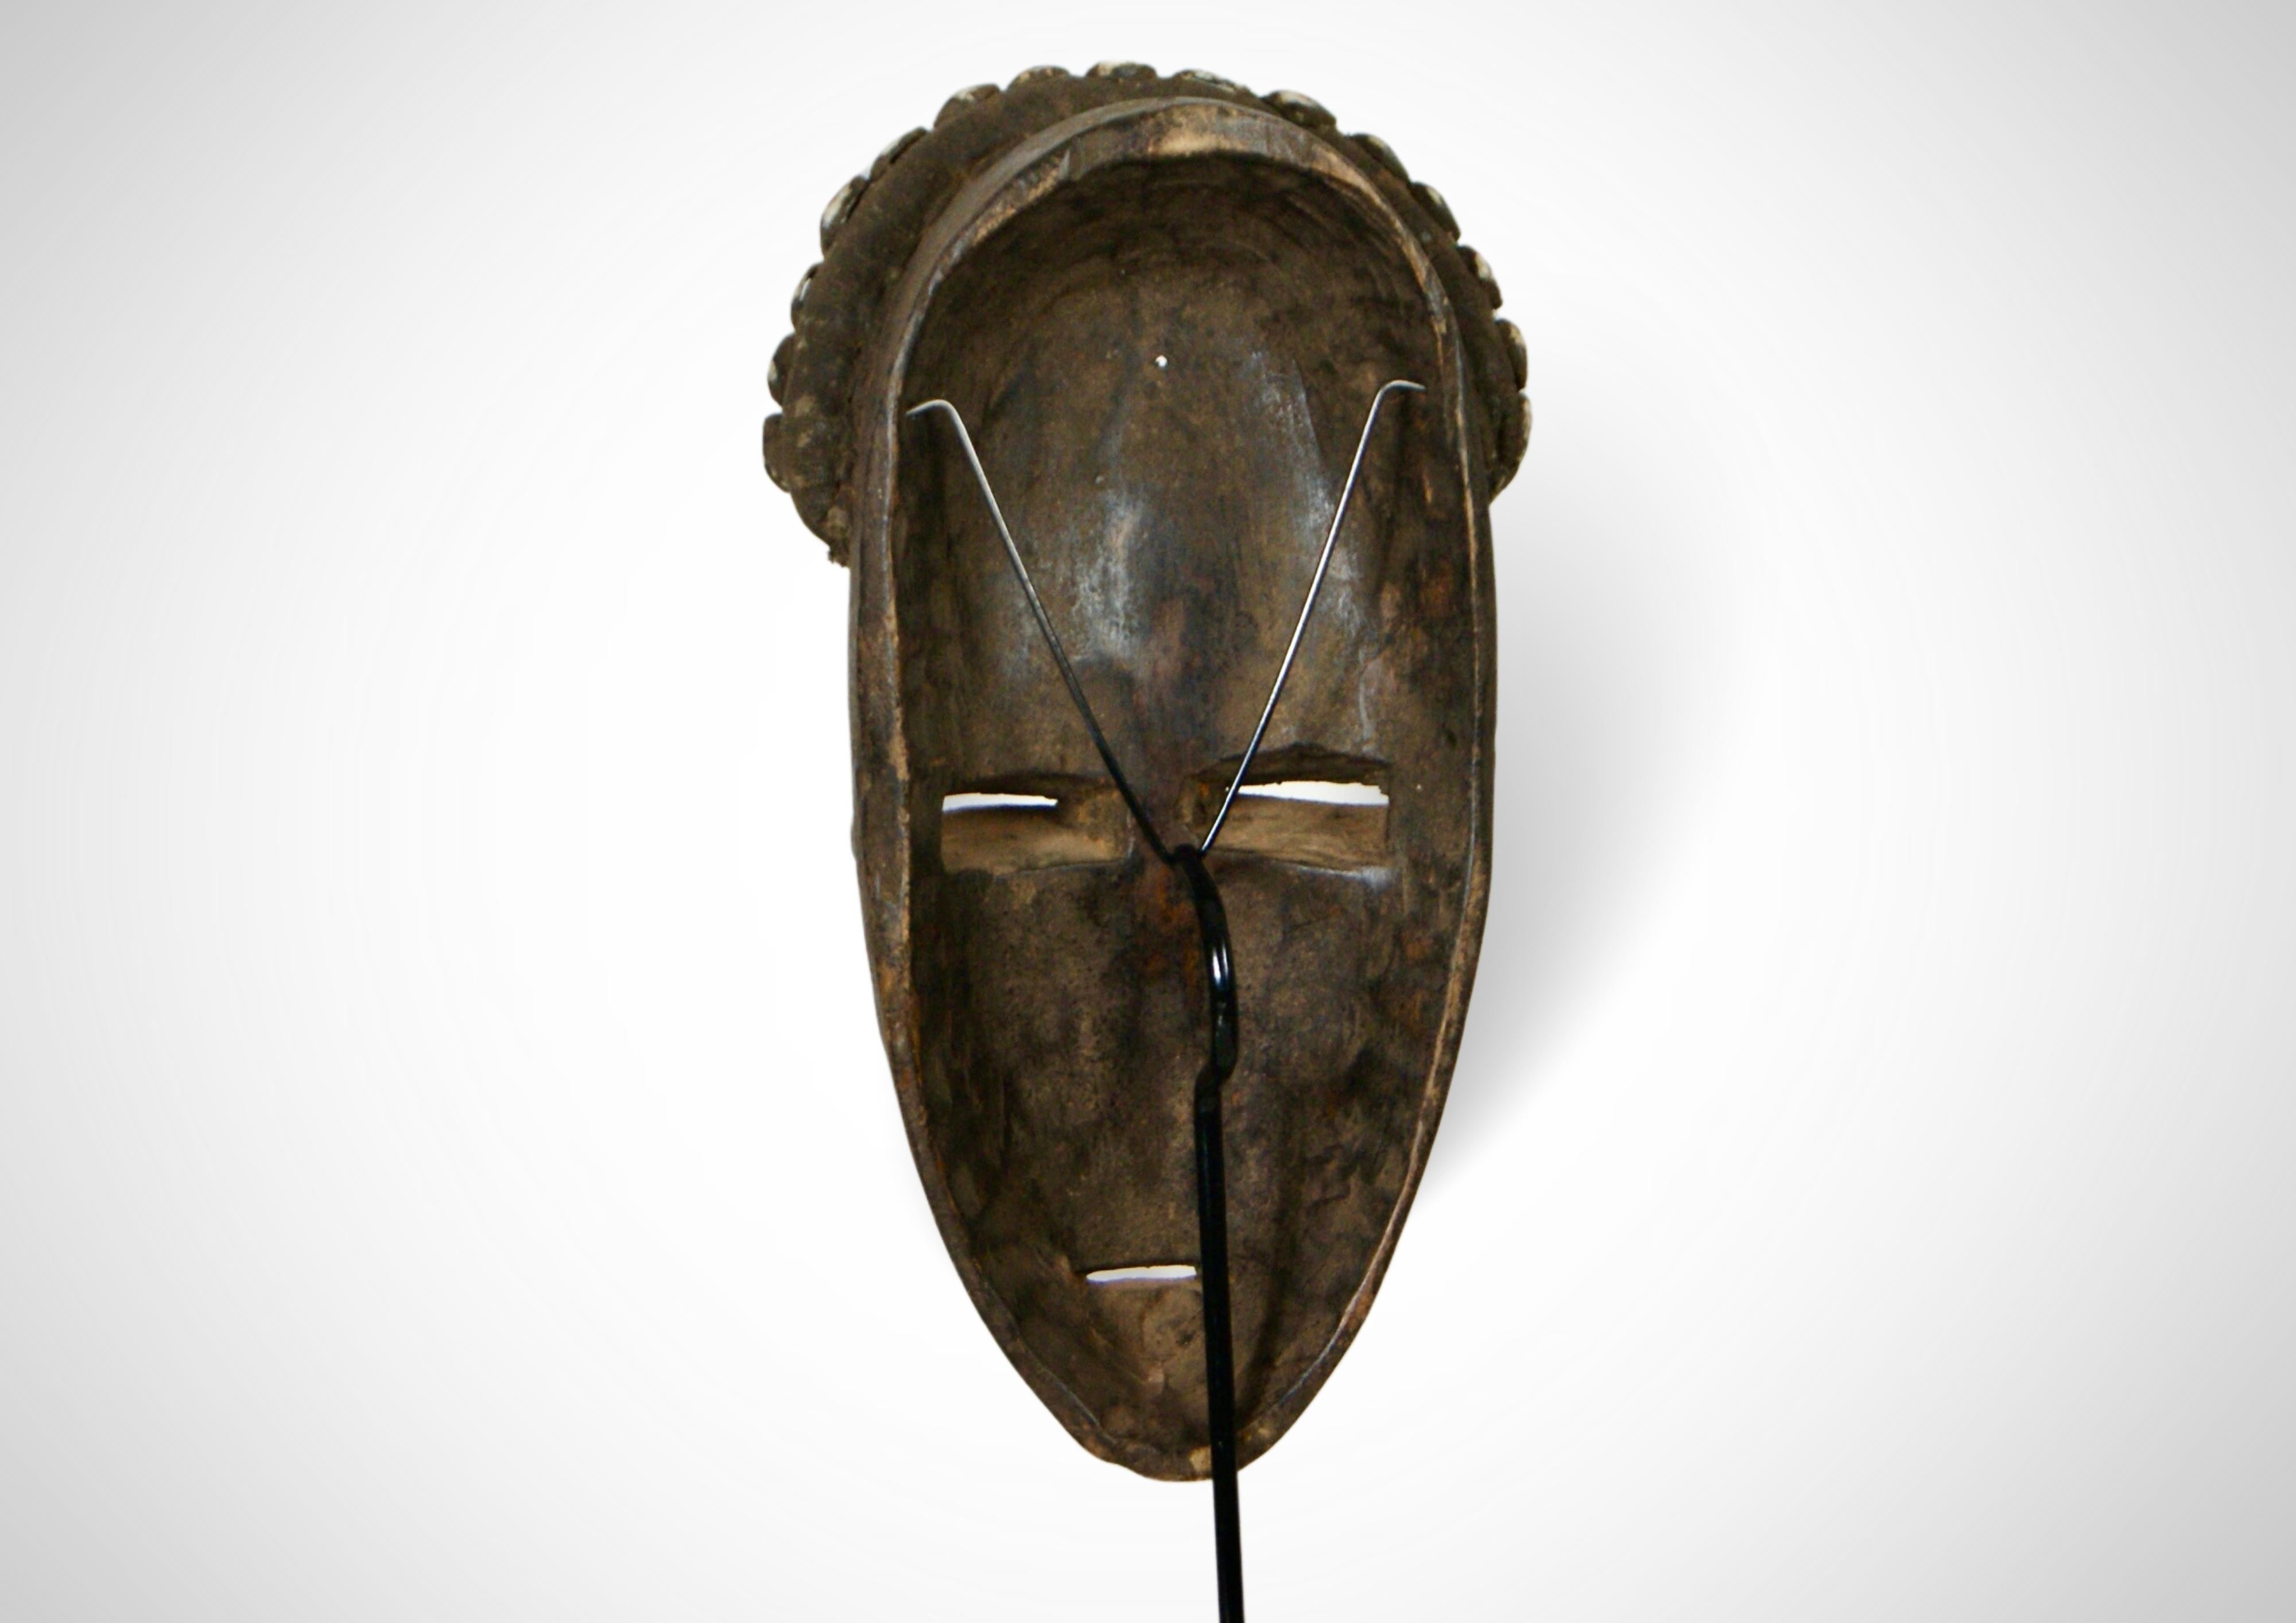 Ancestral Dan Mask 'Deangle' with Cowrie Shells Large For Sale 8